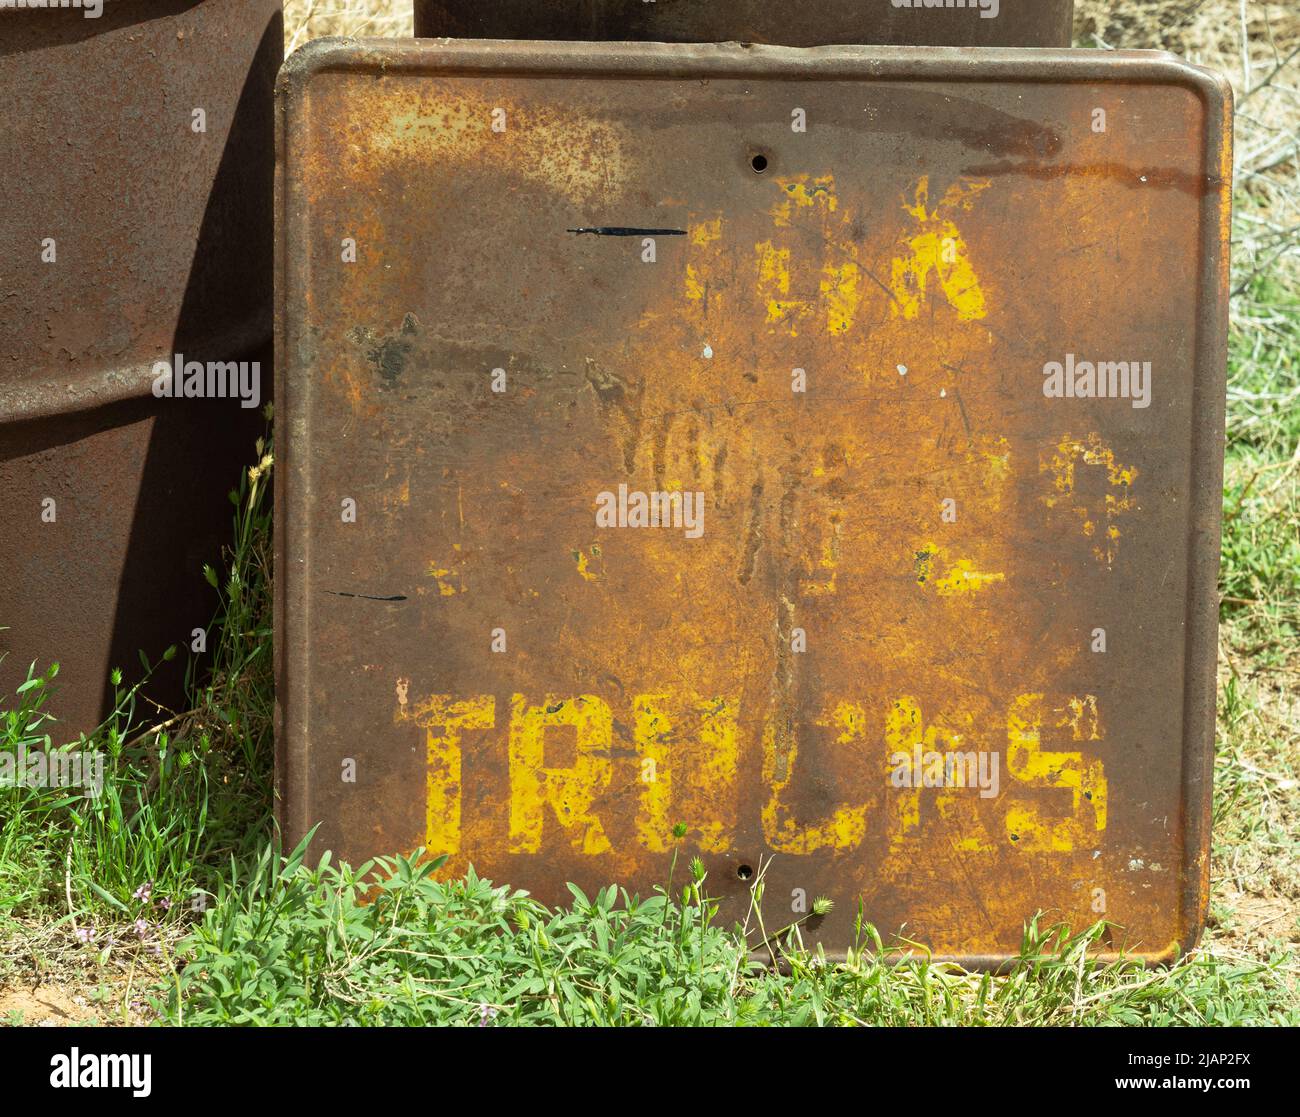 This square truck sign with yellow paint is rusted, old and not of any use. Trucks and this industry no longer see obsolete warning signs like this. Stock Photo